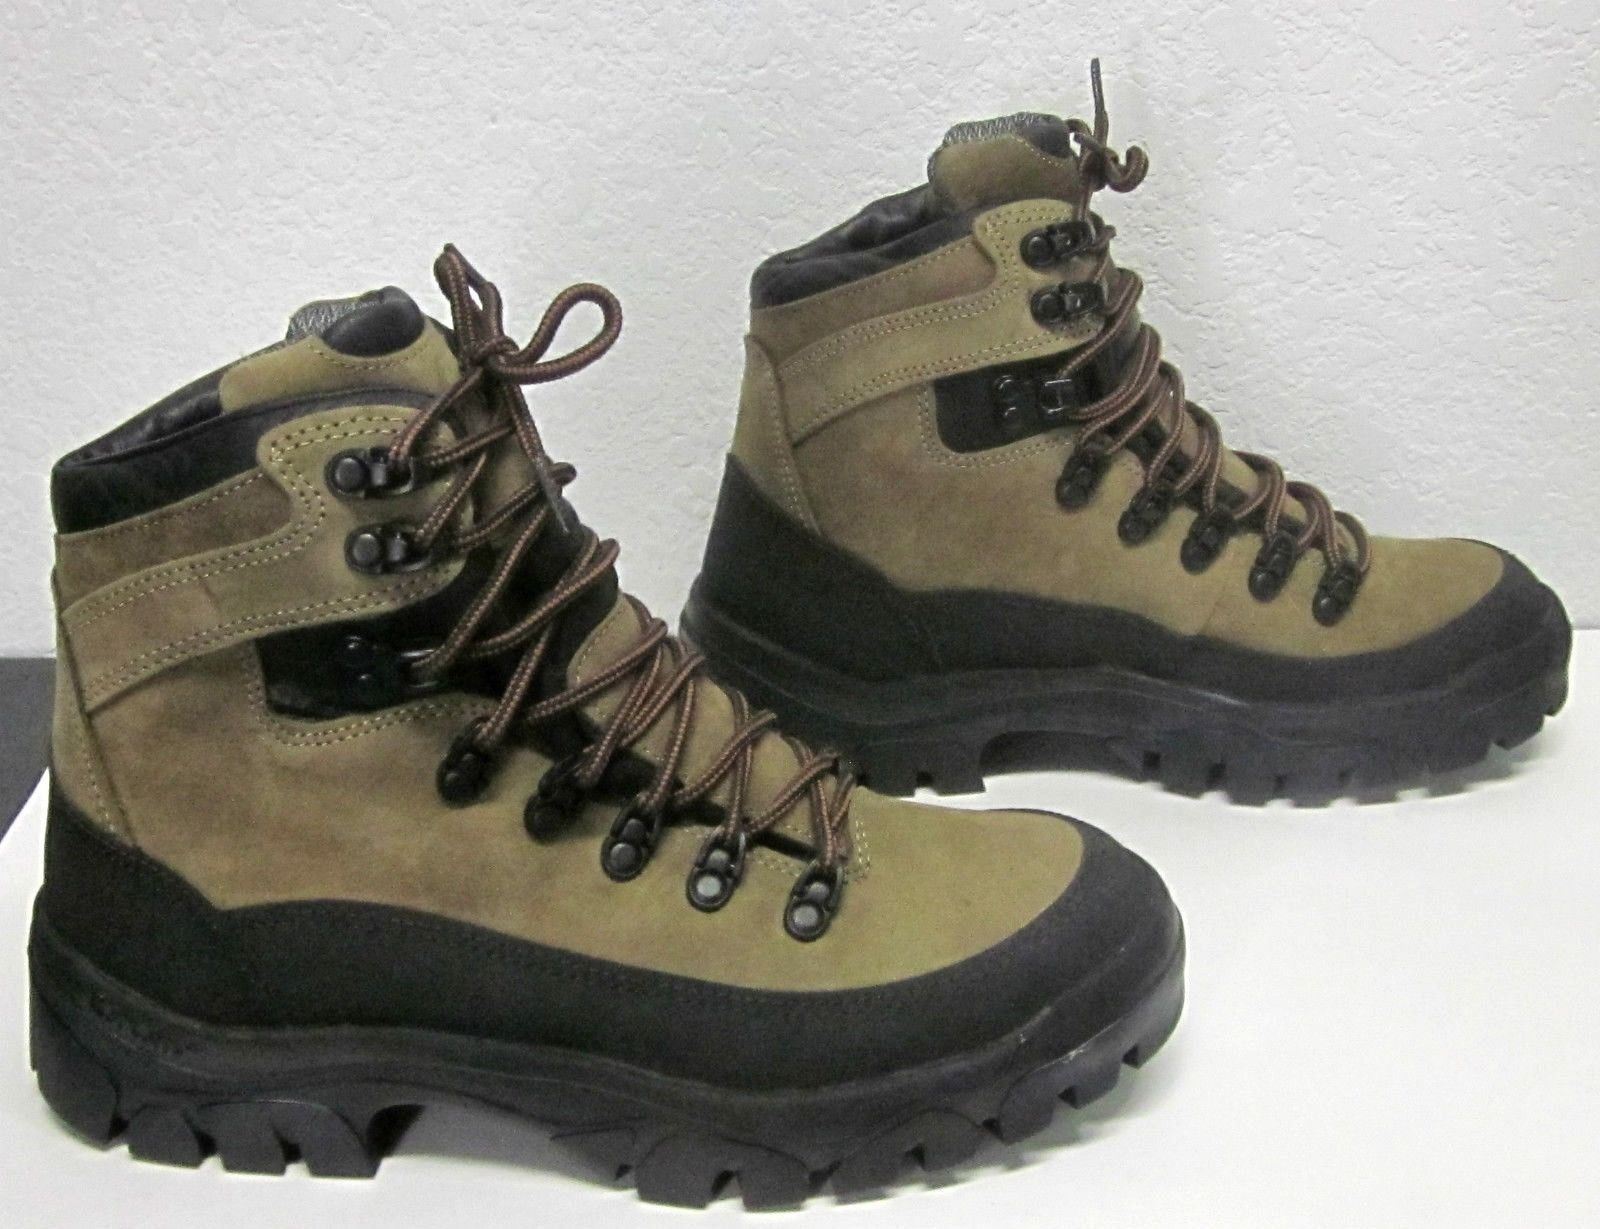 Wellco 87500-007 NWOT US Army Military Hiker Combat Boots MENS 6XW ...